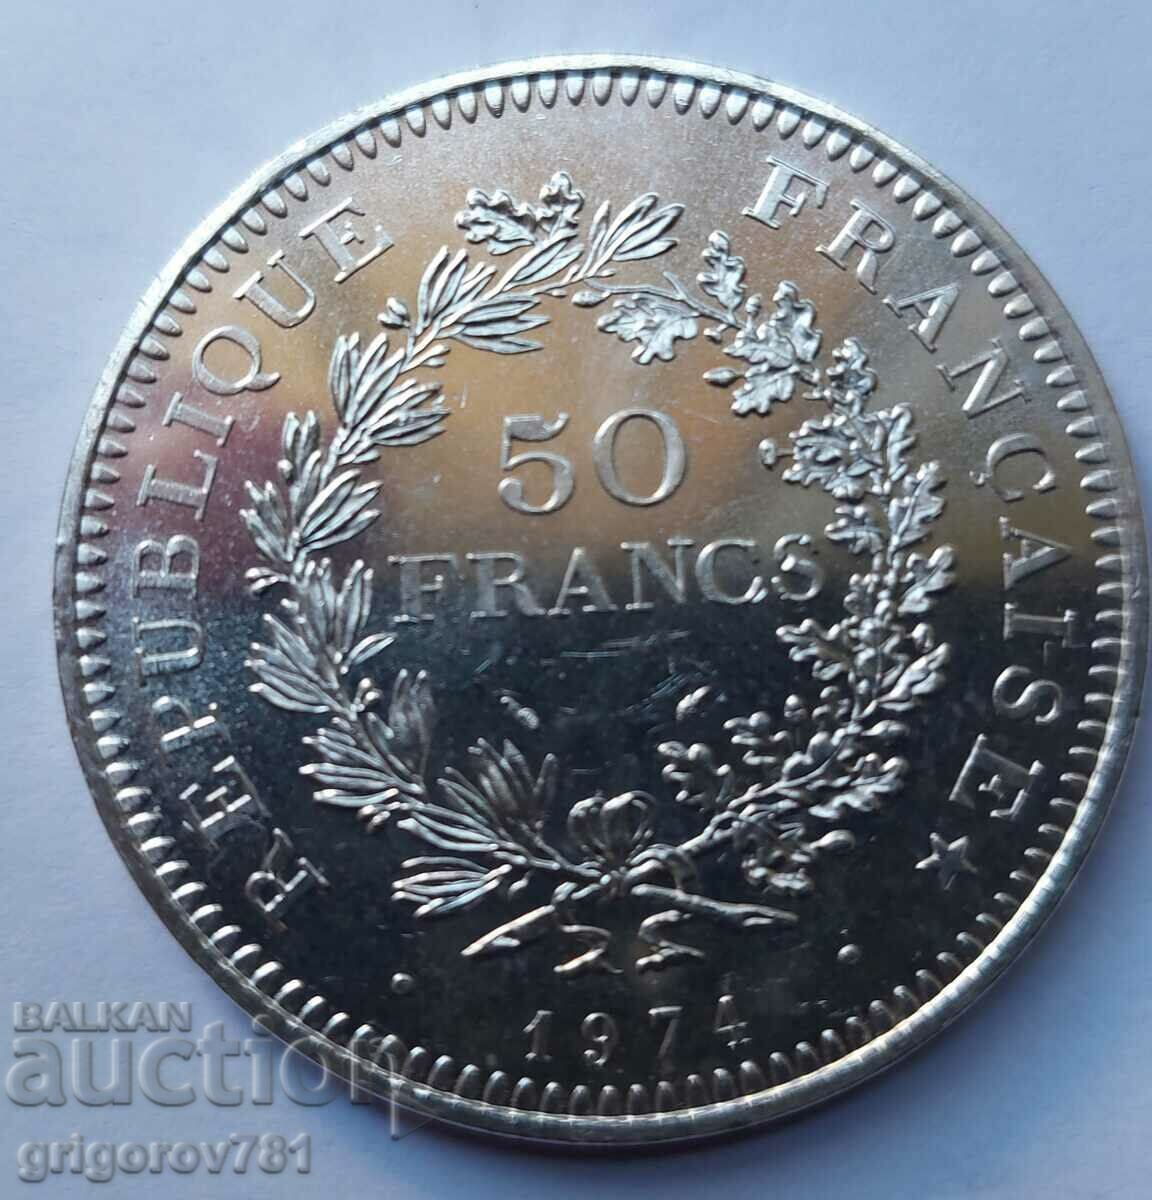 50 Francs Silver France 1974 - Silver Coin #26